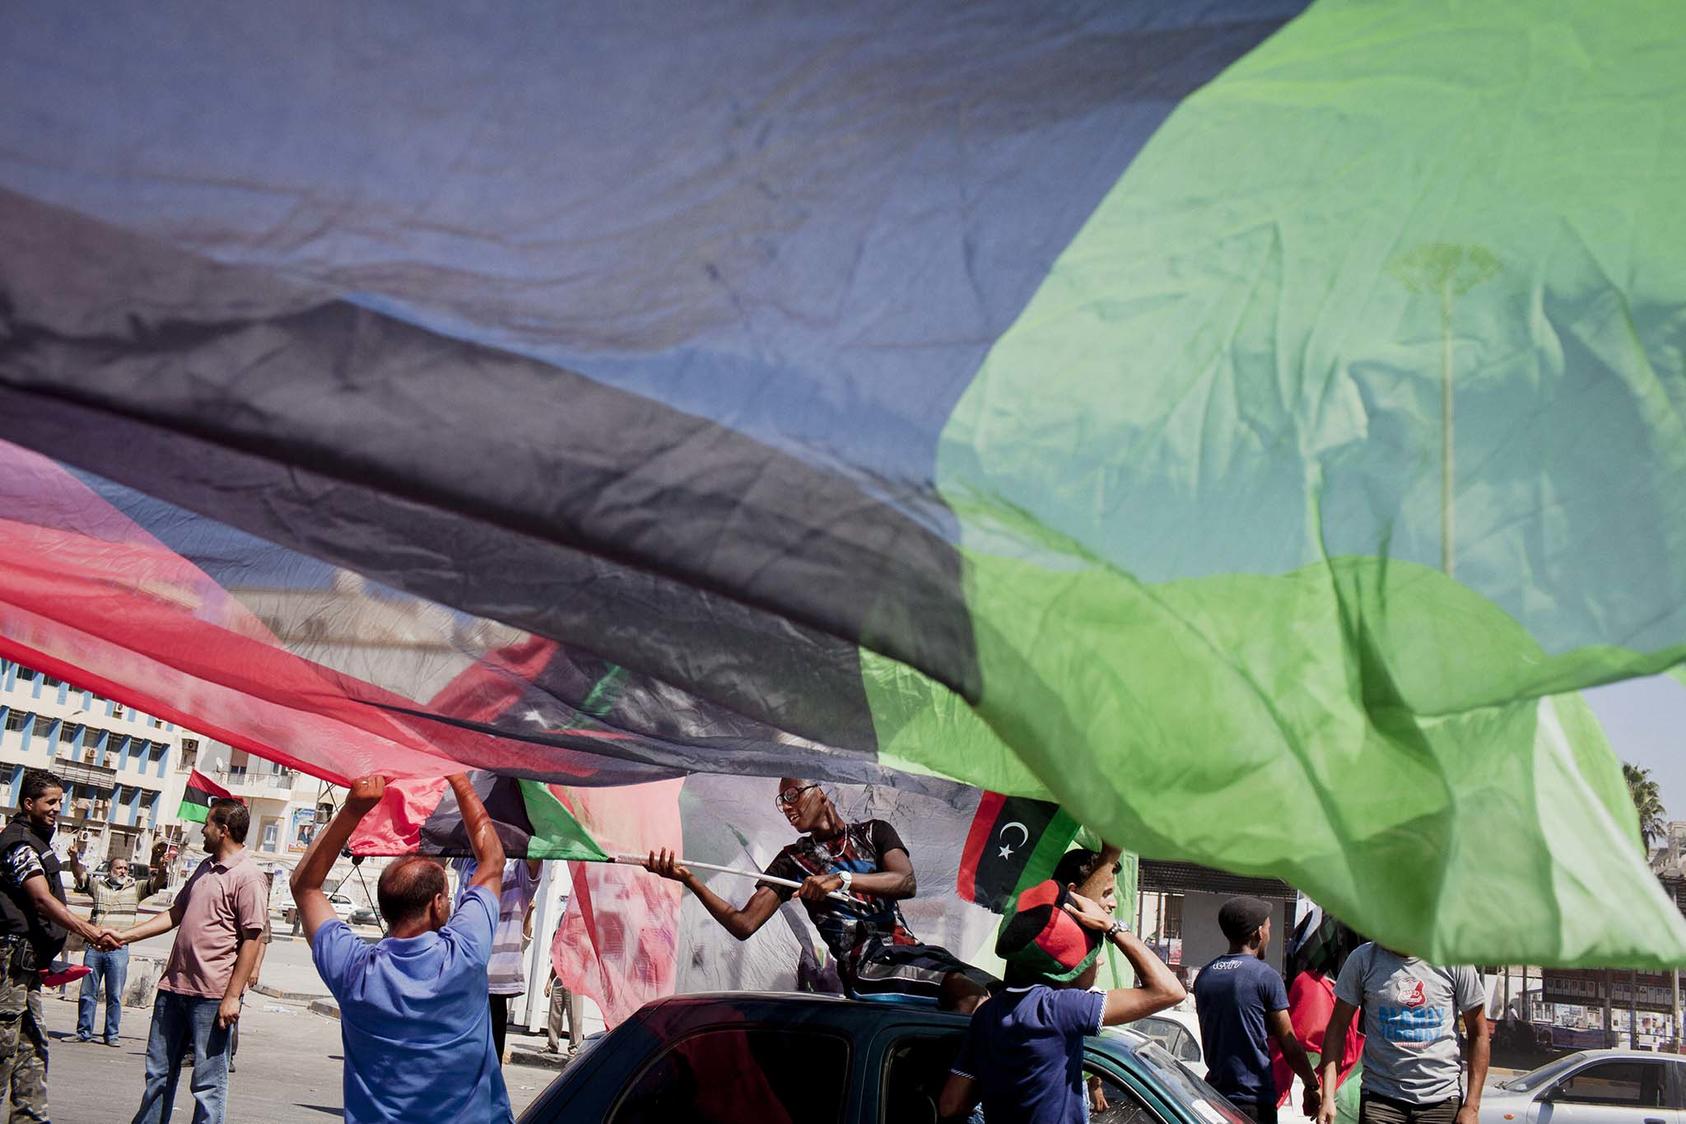 Libyans celebrate in the afternoon during elections in Benghazi, Libya, July 7, 2012. After a decade of conflict, elections slated for December 21 aim to unify the country’s rival administrations and jumpstart national reconciliation. (Tomas Munita/The New York Times)